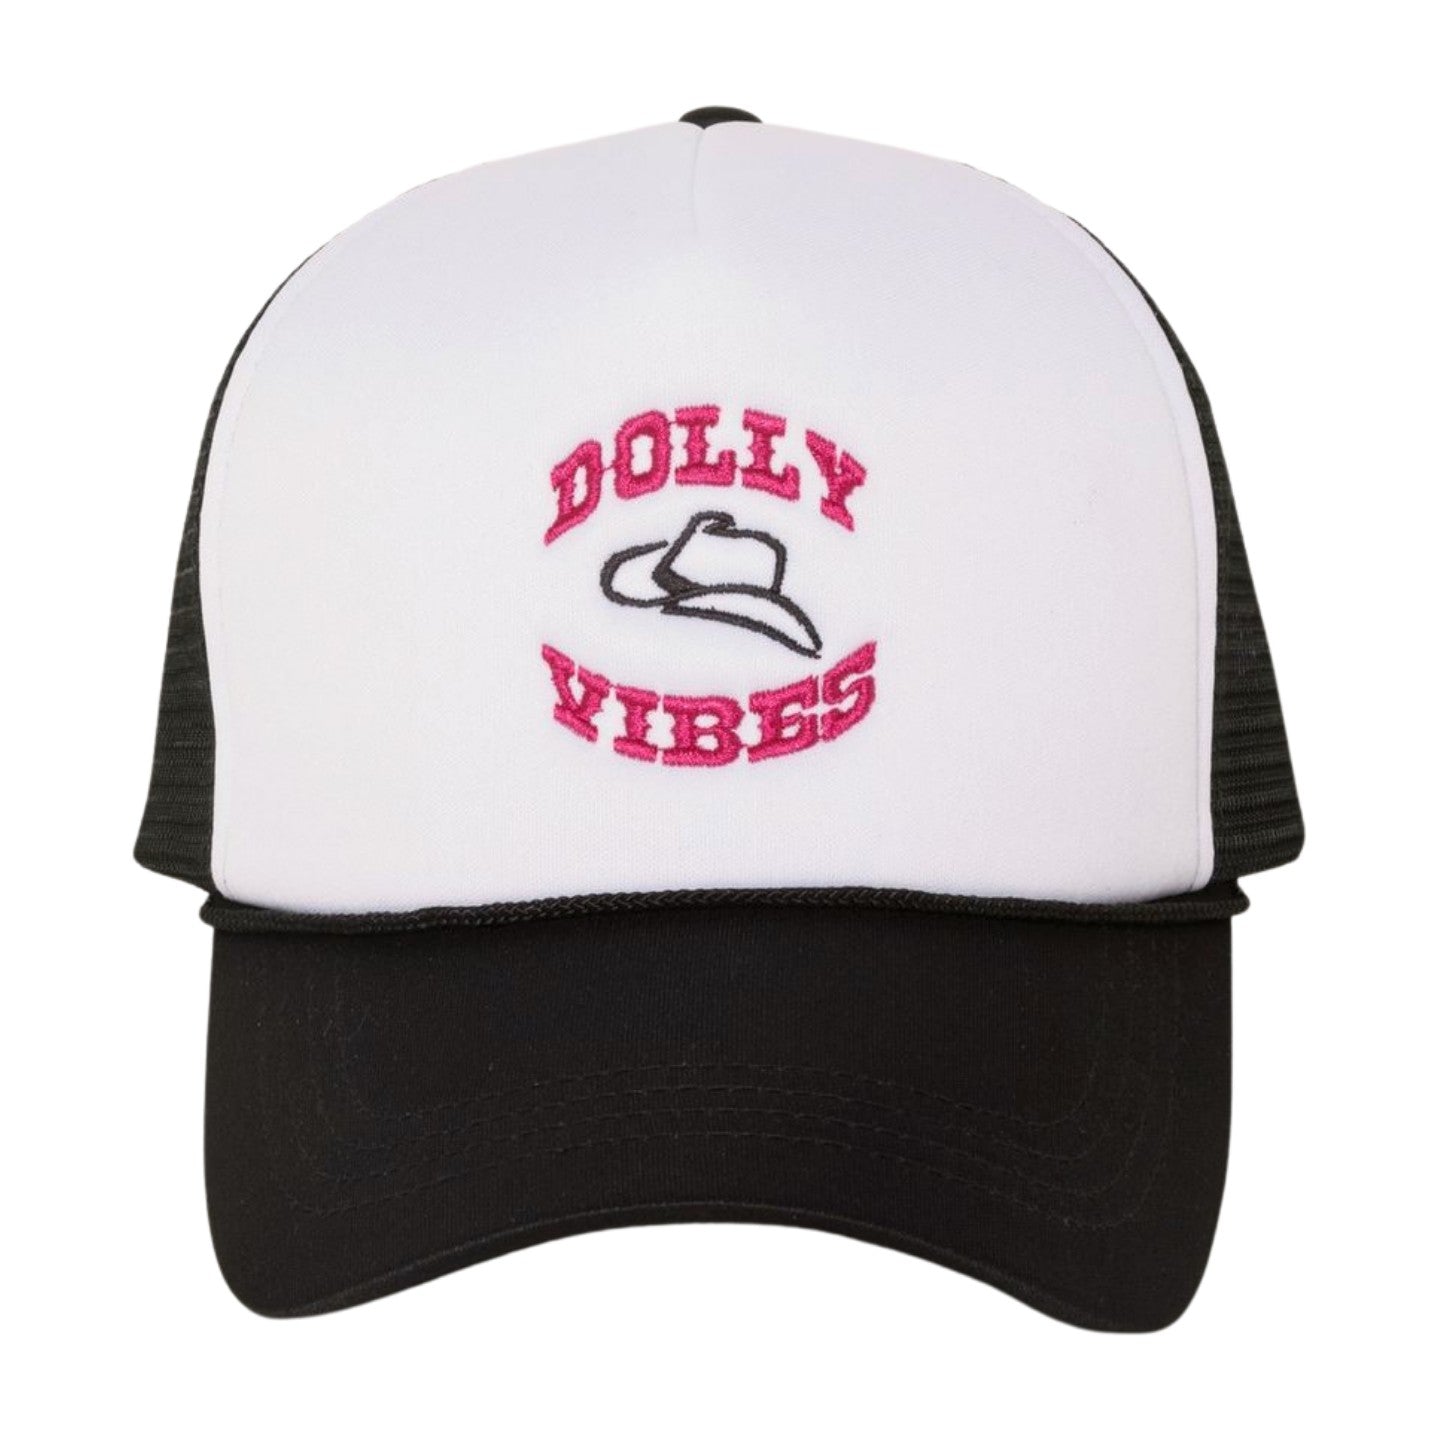 DOLLY VIBES trucker hat